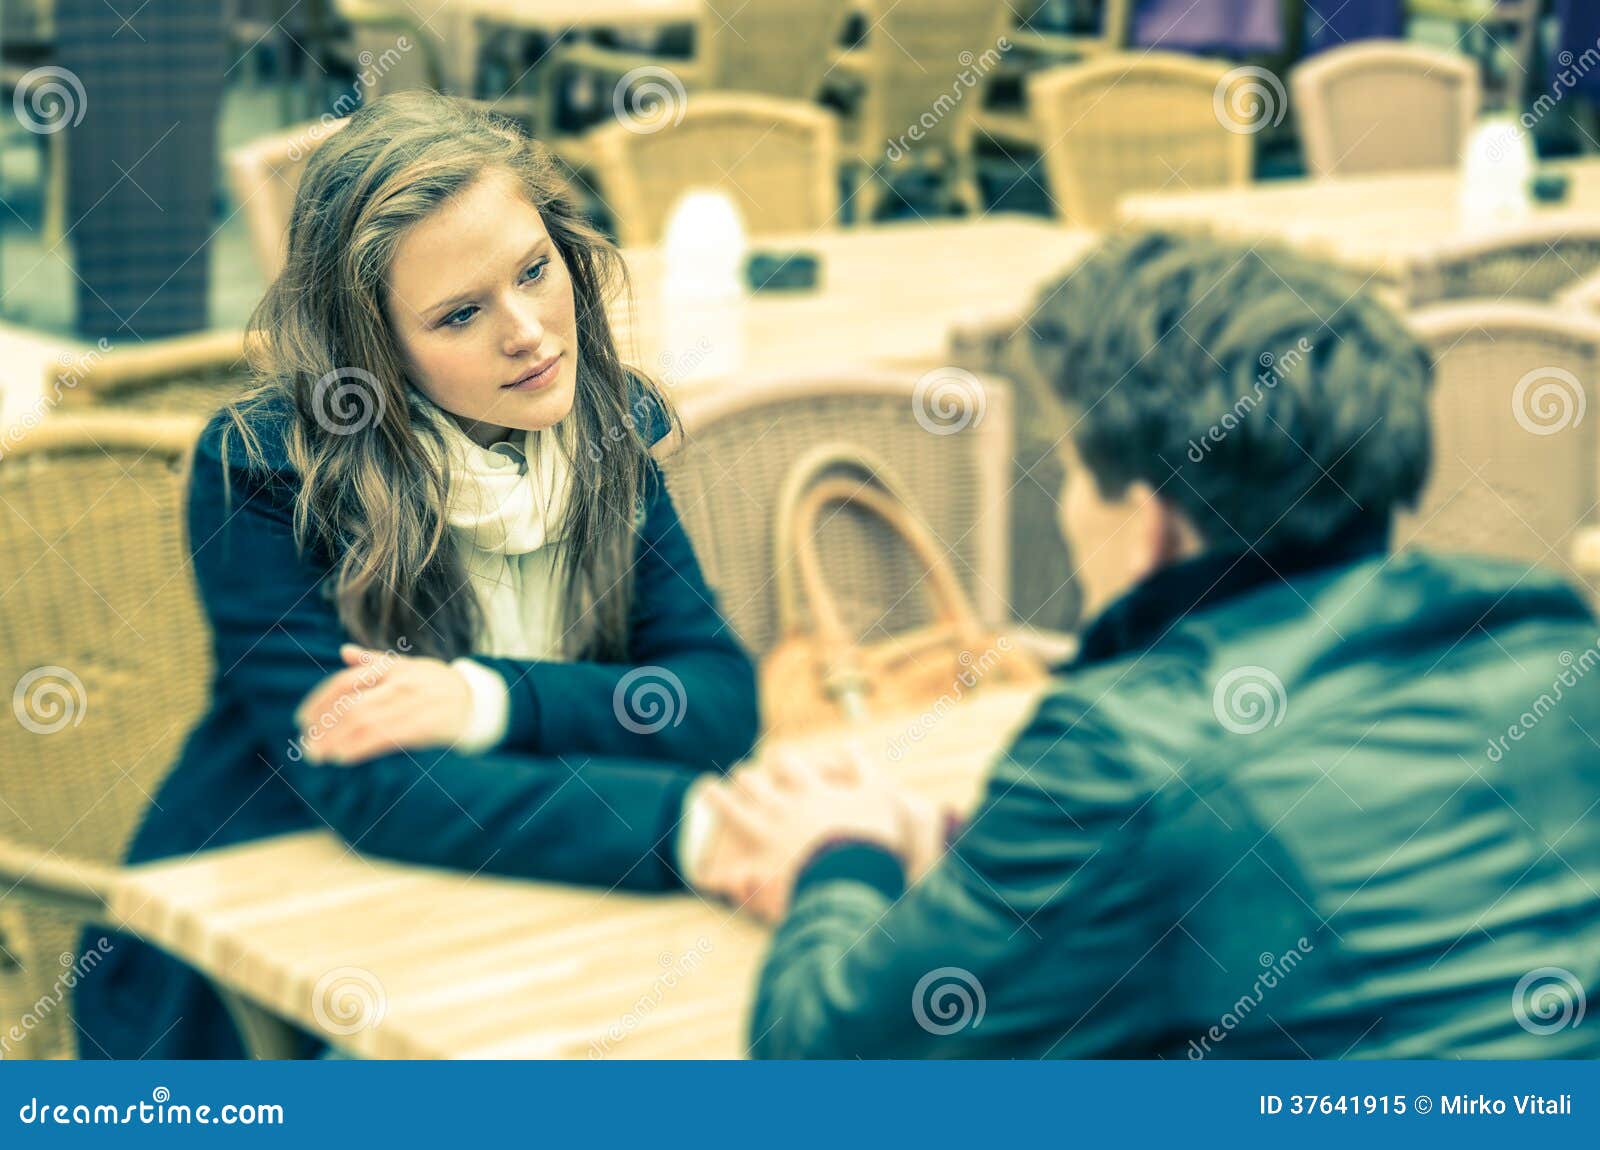 couple in a deep moment of a confession